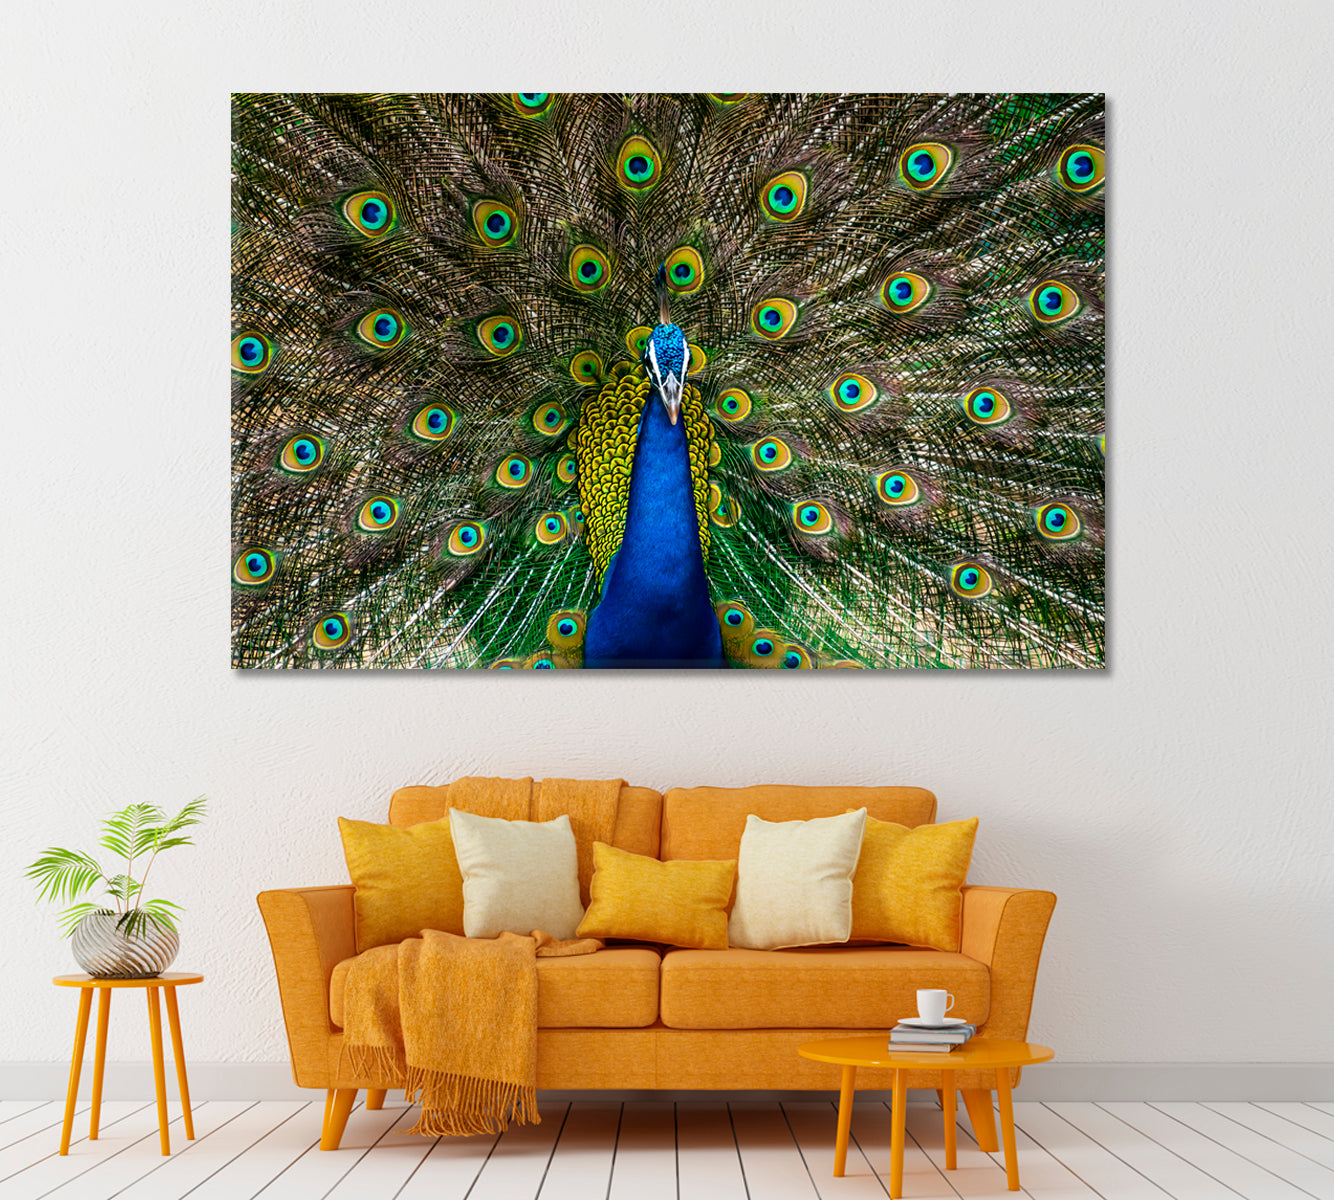 Peacock Showing Bright Feathers Canvas Print ArtLexy 1 Panel 24"x16" inches 